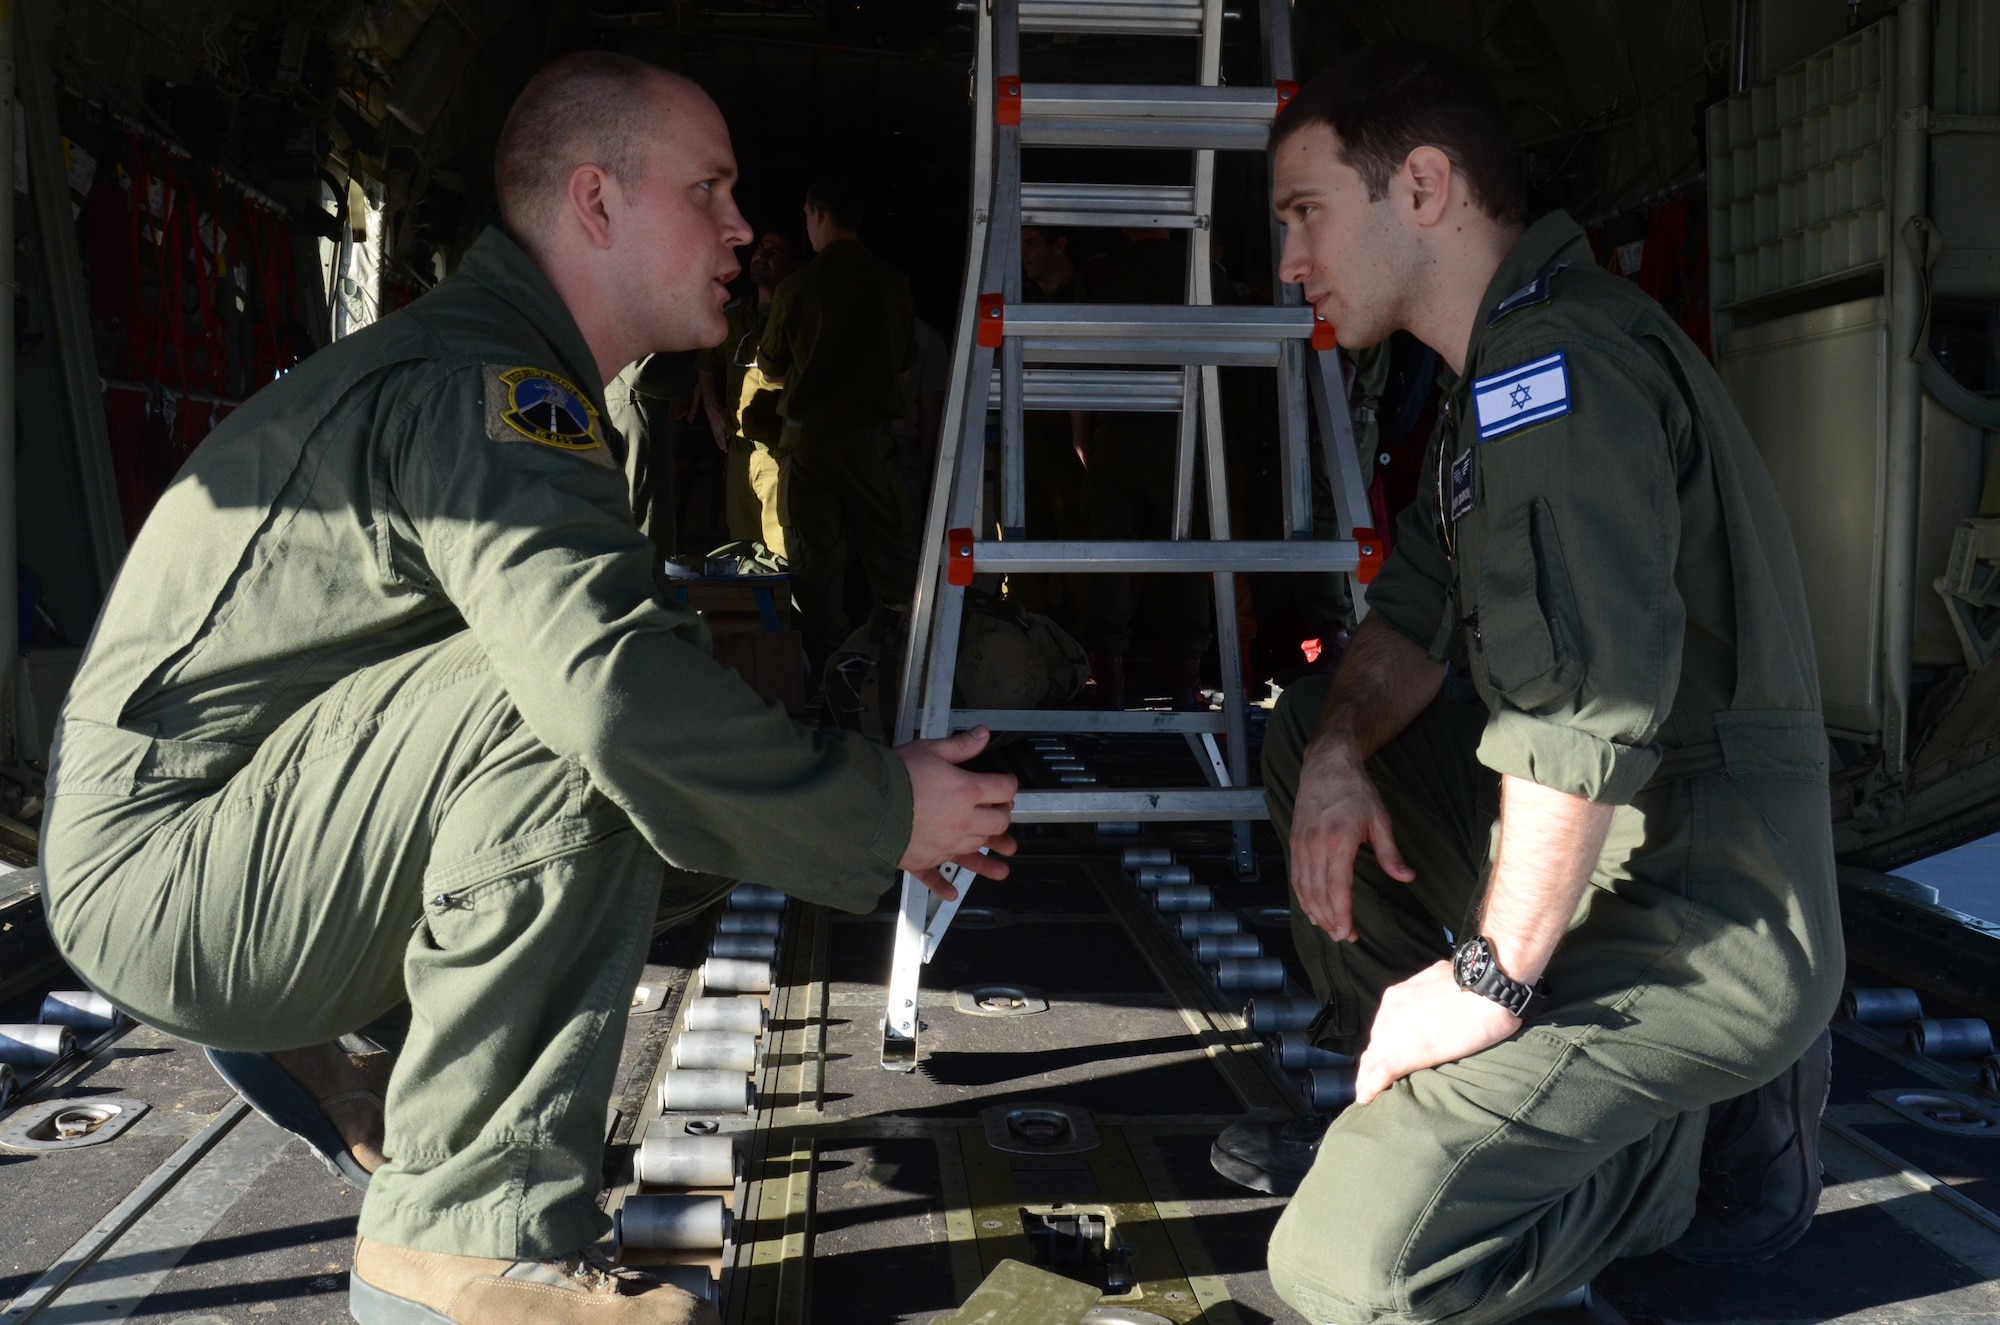 Staff Sgt. Jim Gettis, 86th Operations Support Squadron loadmaster, explains the capabilities of the C-130J Hercules to Segen Rishon Mor Dudkin, 757th Squadron loadmaster, at Nevatim Air Force Base, Israel, Feb. 3, 2013. The 86th Airlift Wing conducted a flying training deployment with the Israeli Air Force in order to strengthen partnerships and maintain readiness for contingency operations. (U.S. Air Force photo / 2nd Lt. Kay M. Nissen)